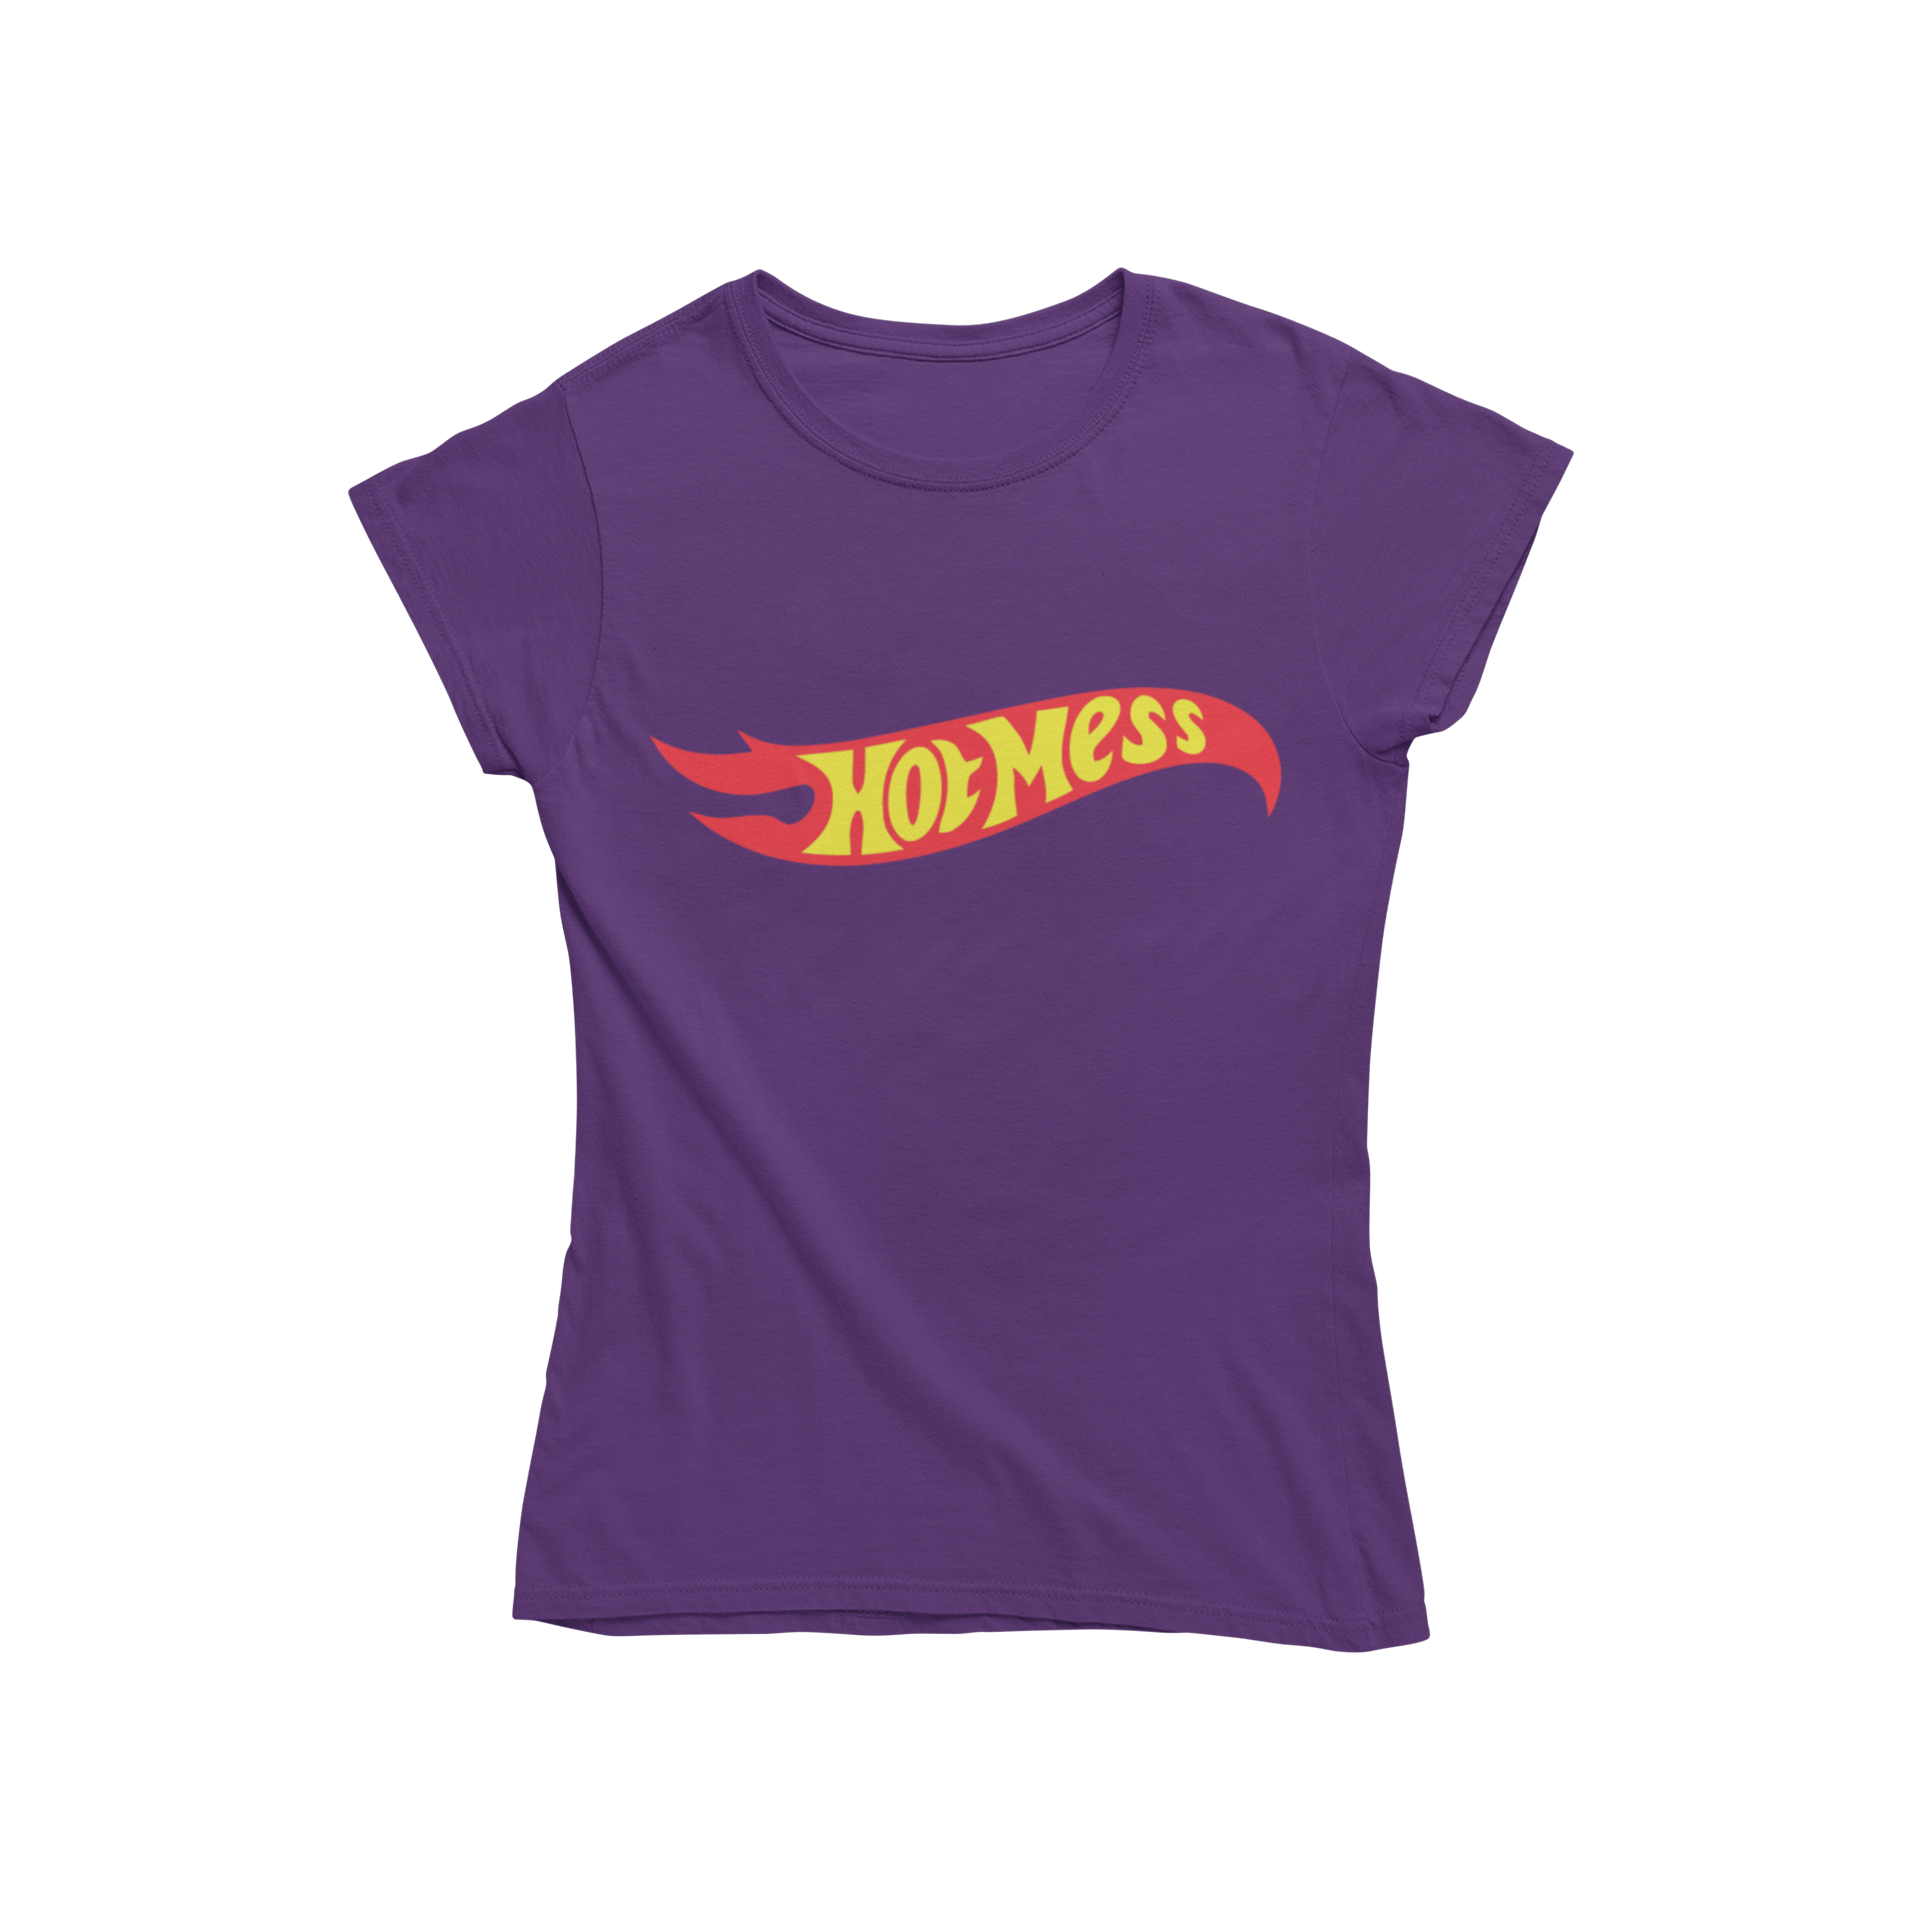 Looking for a trendy new t-shirt? Check out Teevolution! We offer a women's fitted t-shirt inspired by Hot Wheels, but with a fun twist – "Hot Mess". Get ready to turn heads with our unique and stylish t-shirt design.